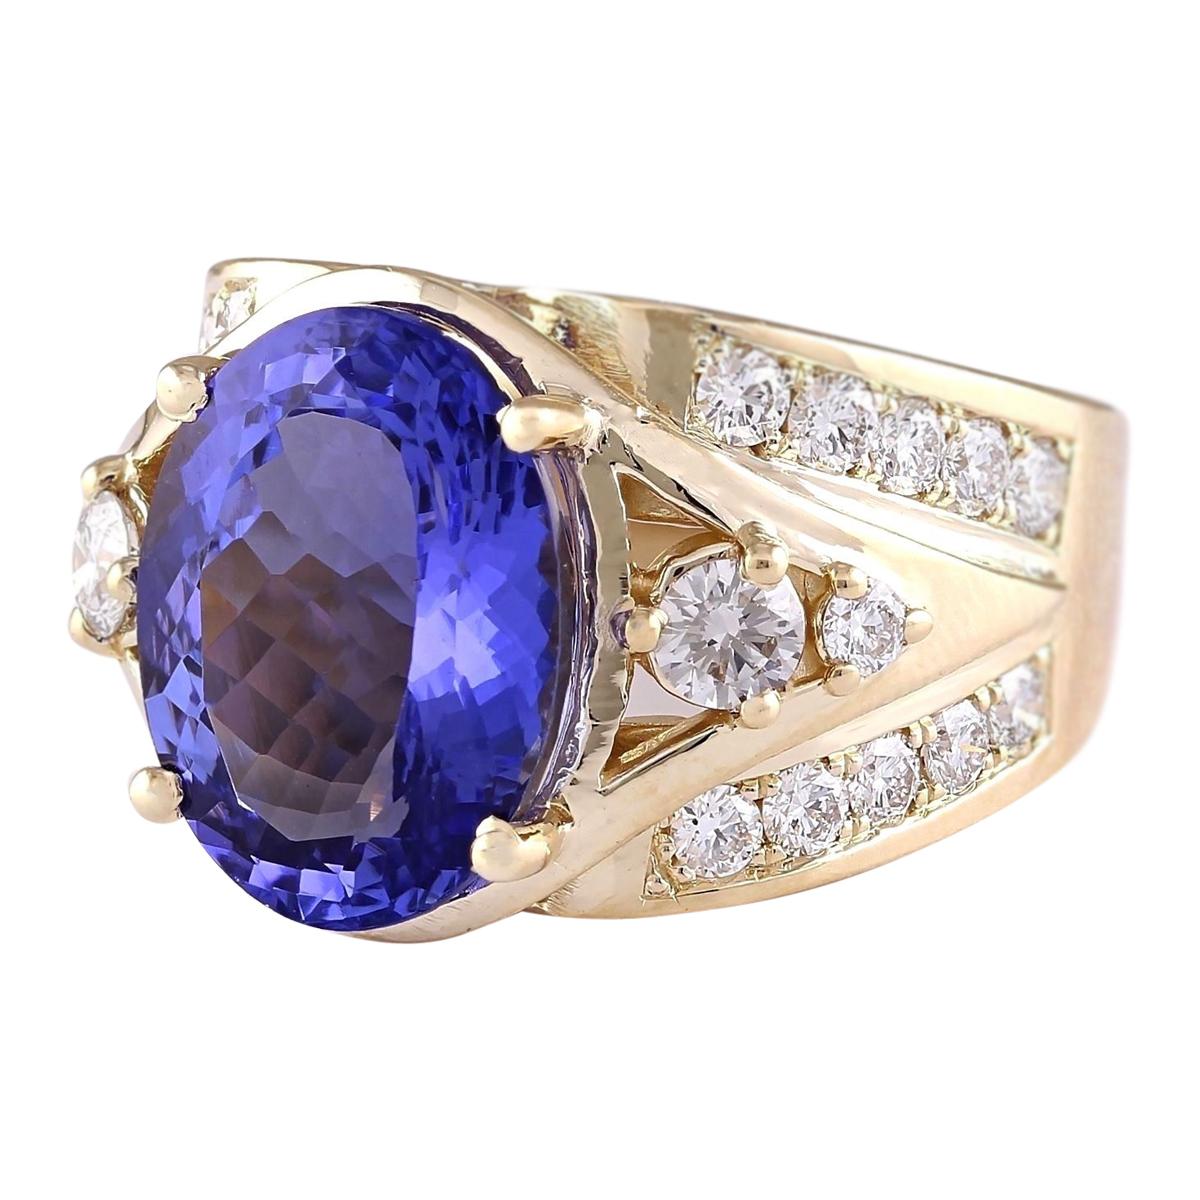 Discover sheer elegance and sophistication with our breathtaking Natural Tanzanite and Diamond Ring, meticulously crafted in luxurious 14K Yellow Gold. Each detail speaks to the utmost quality and beauty, from the distinguished 14K stamp affirming